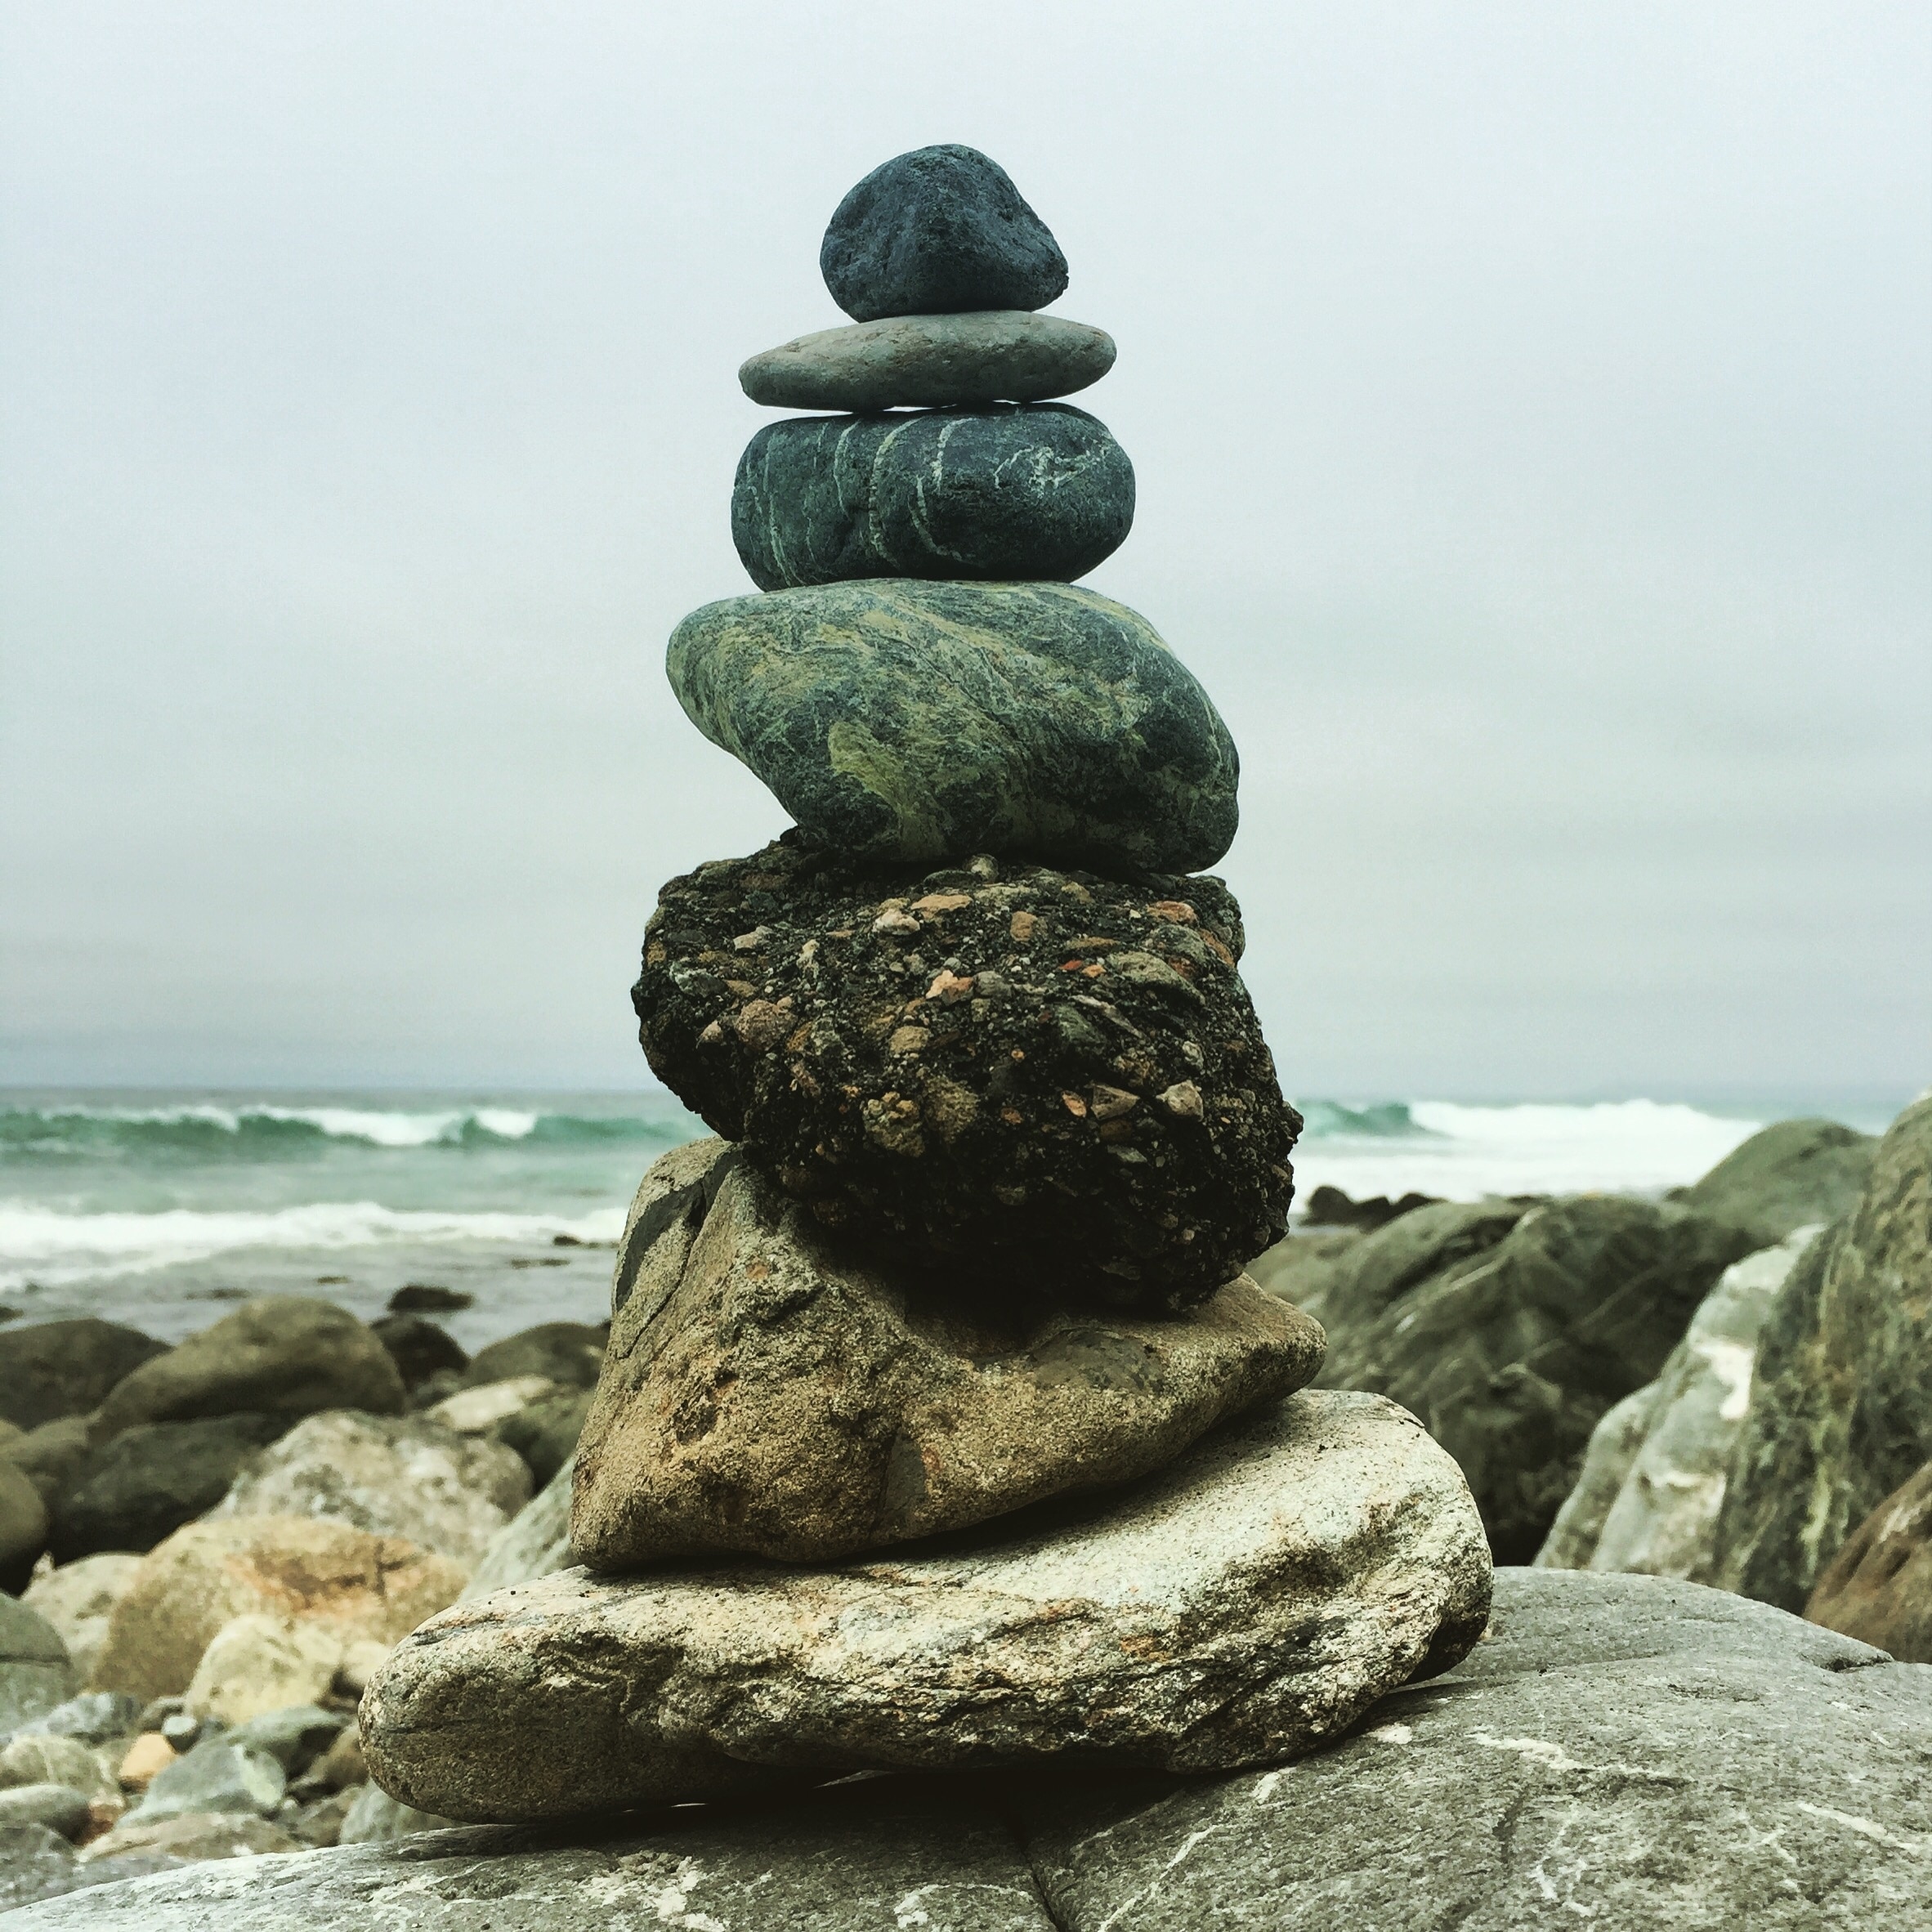 Rock balancing ... Listening to waves crashing ... Making wishes ... Appreciating nature ... Loving Mother Earth ... Living off the grid ... Enjoying my life ... Big Sur camping ... retreat from everyday woes ... End of May 2015